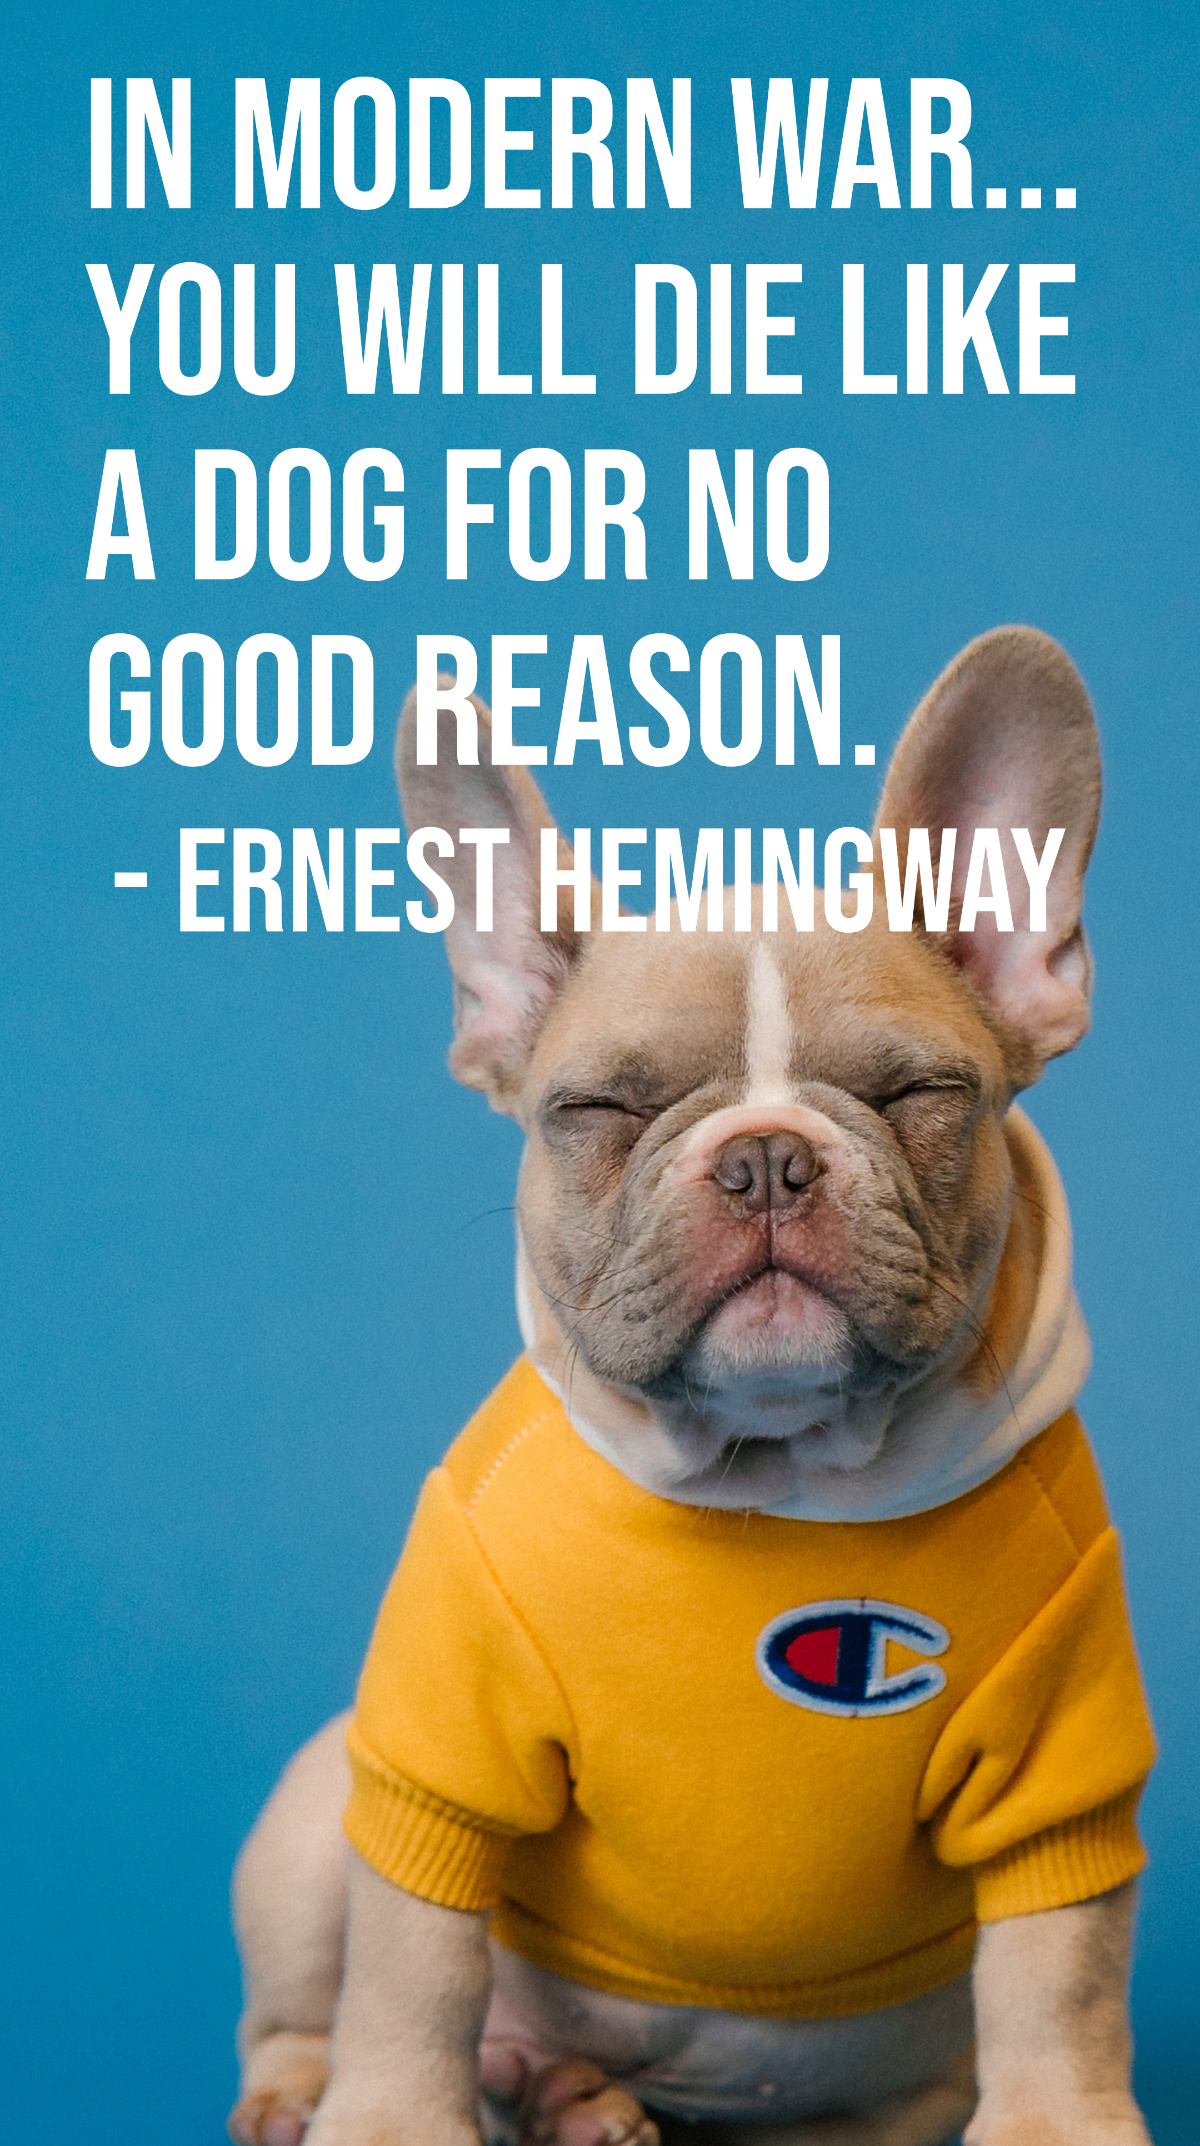 Free Ernest Hemingway - In modern war... you will die like a dog for no good reason. Template